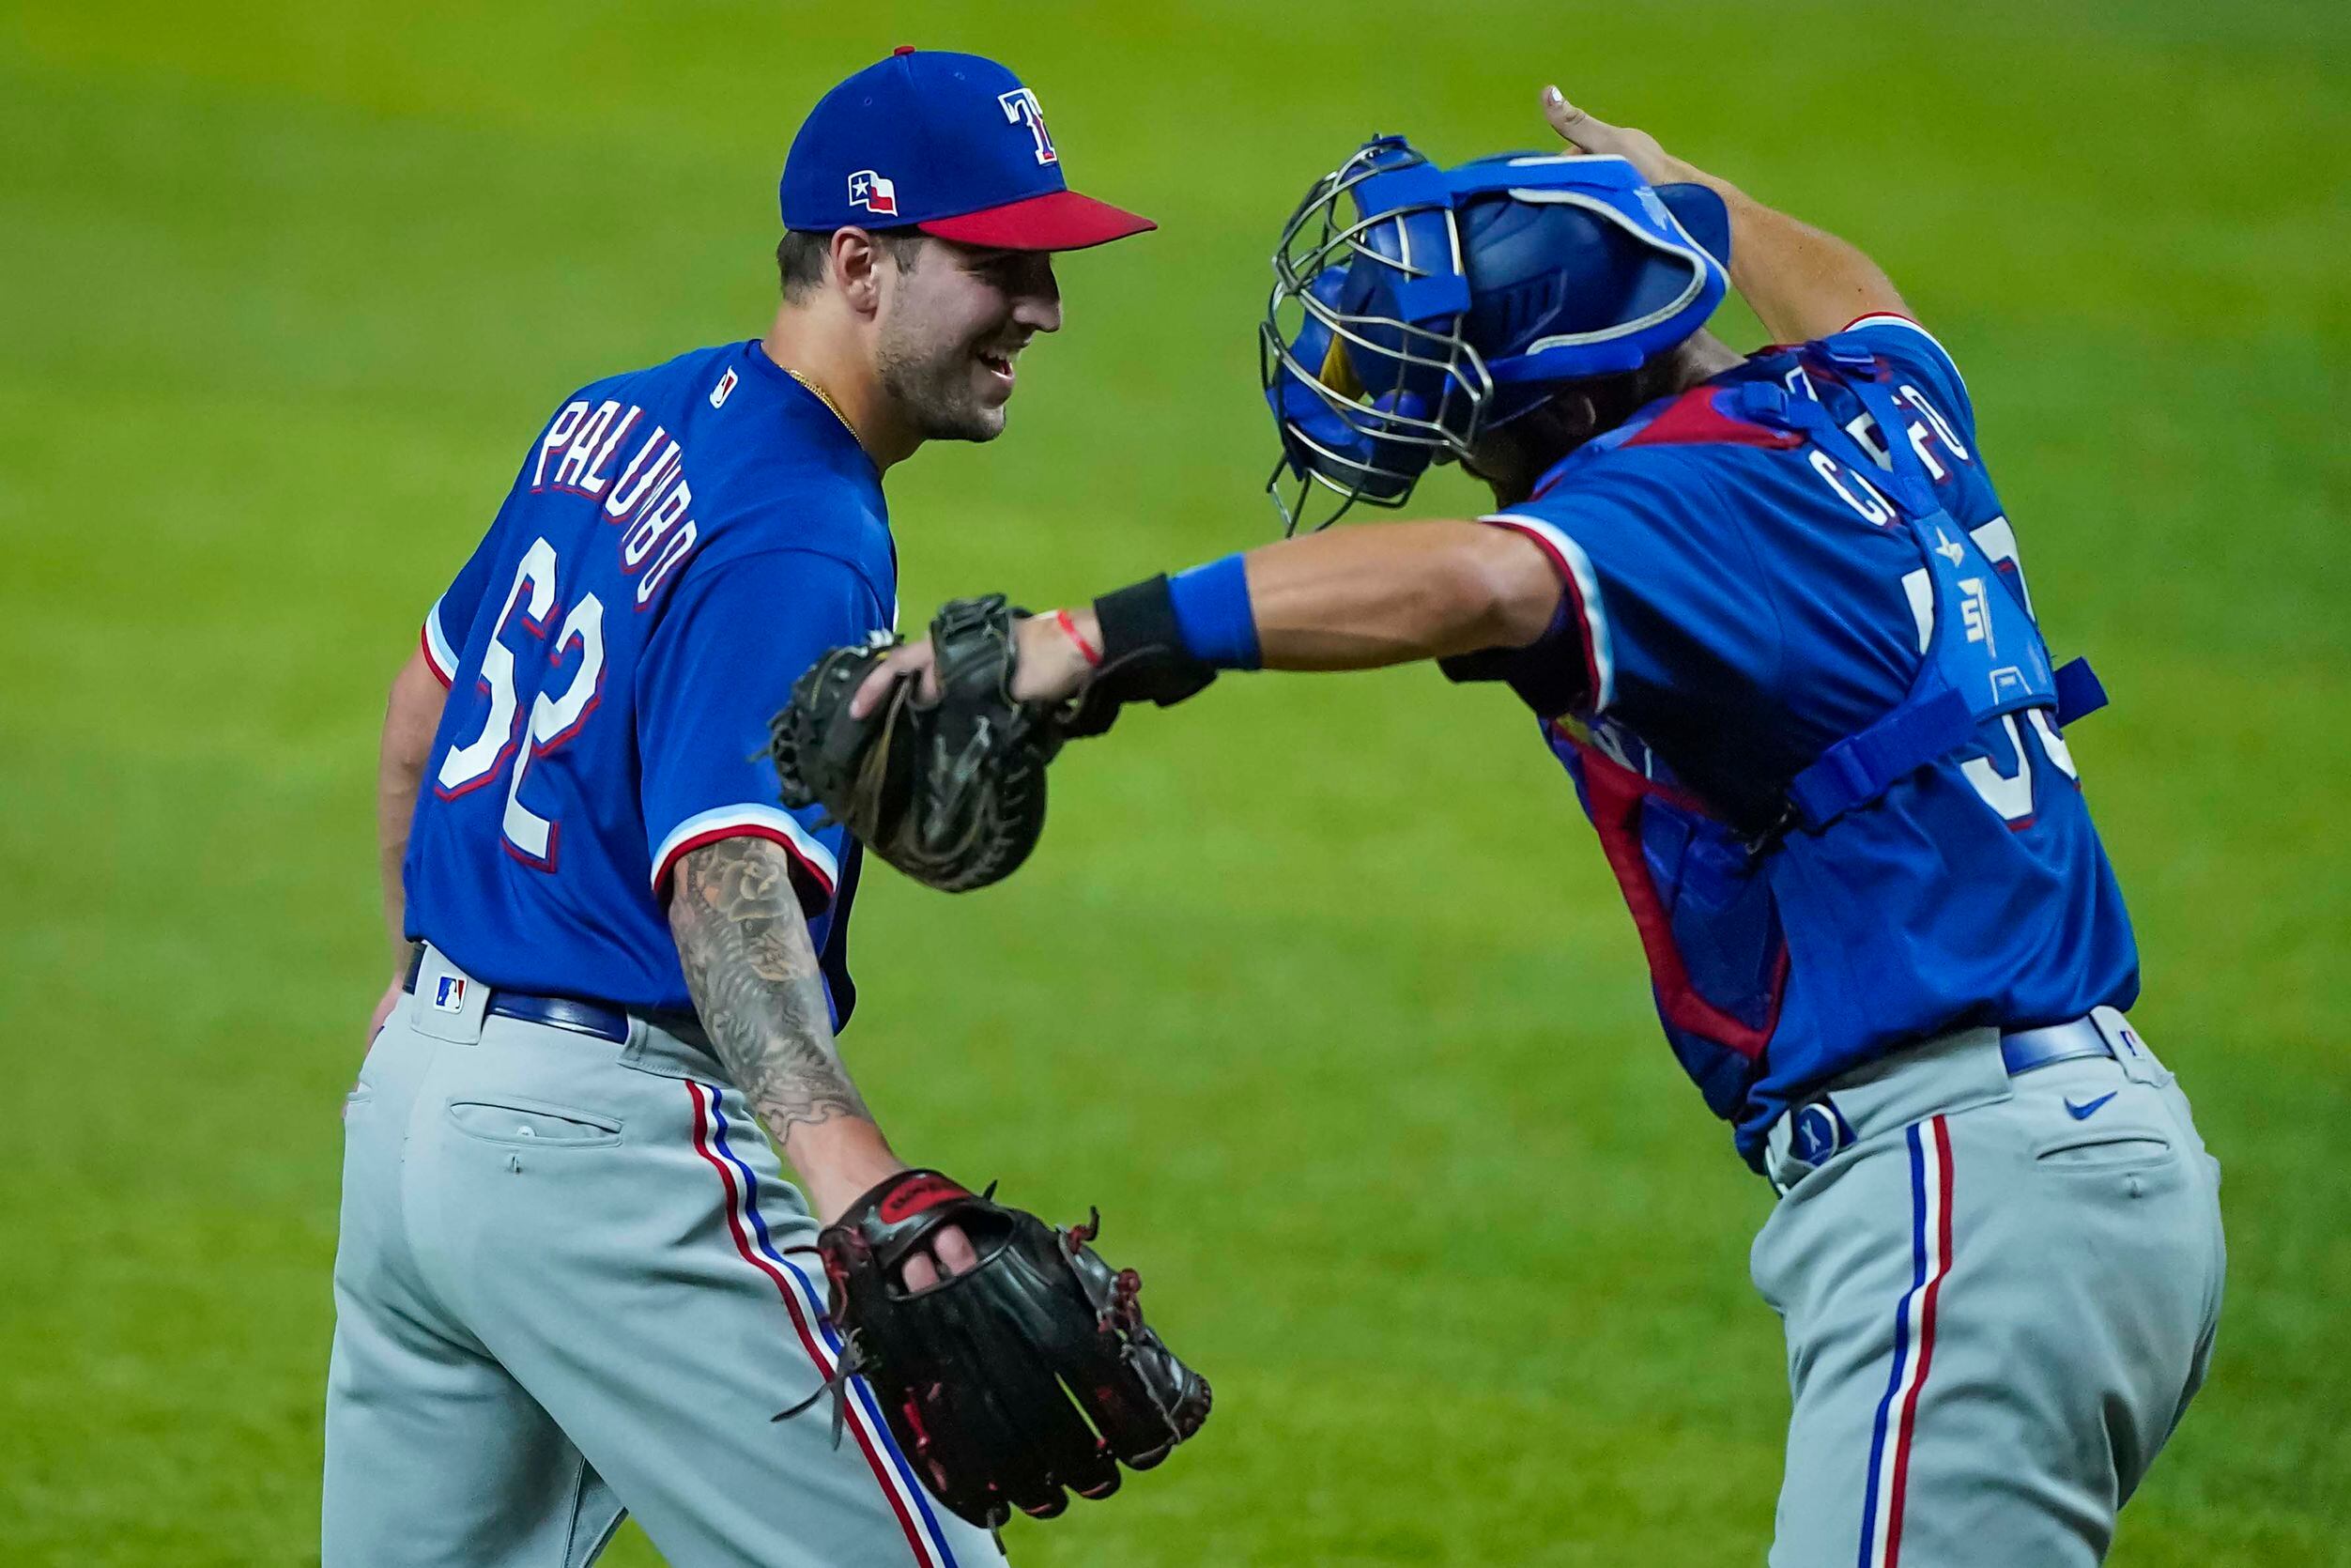 Pitcher Joe Palumbo playfully gets a distanced hug from catcher Nick Ciuffo after recording...